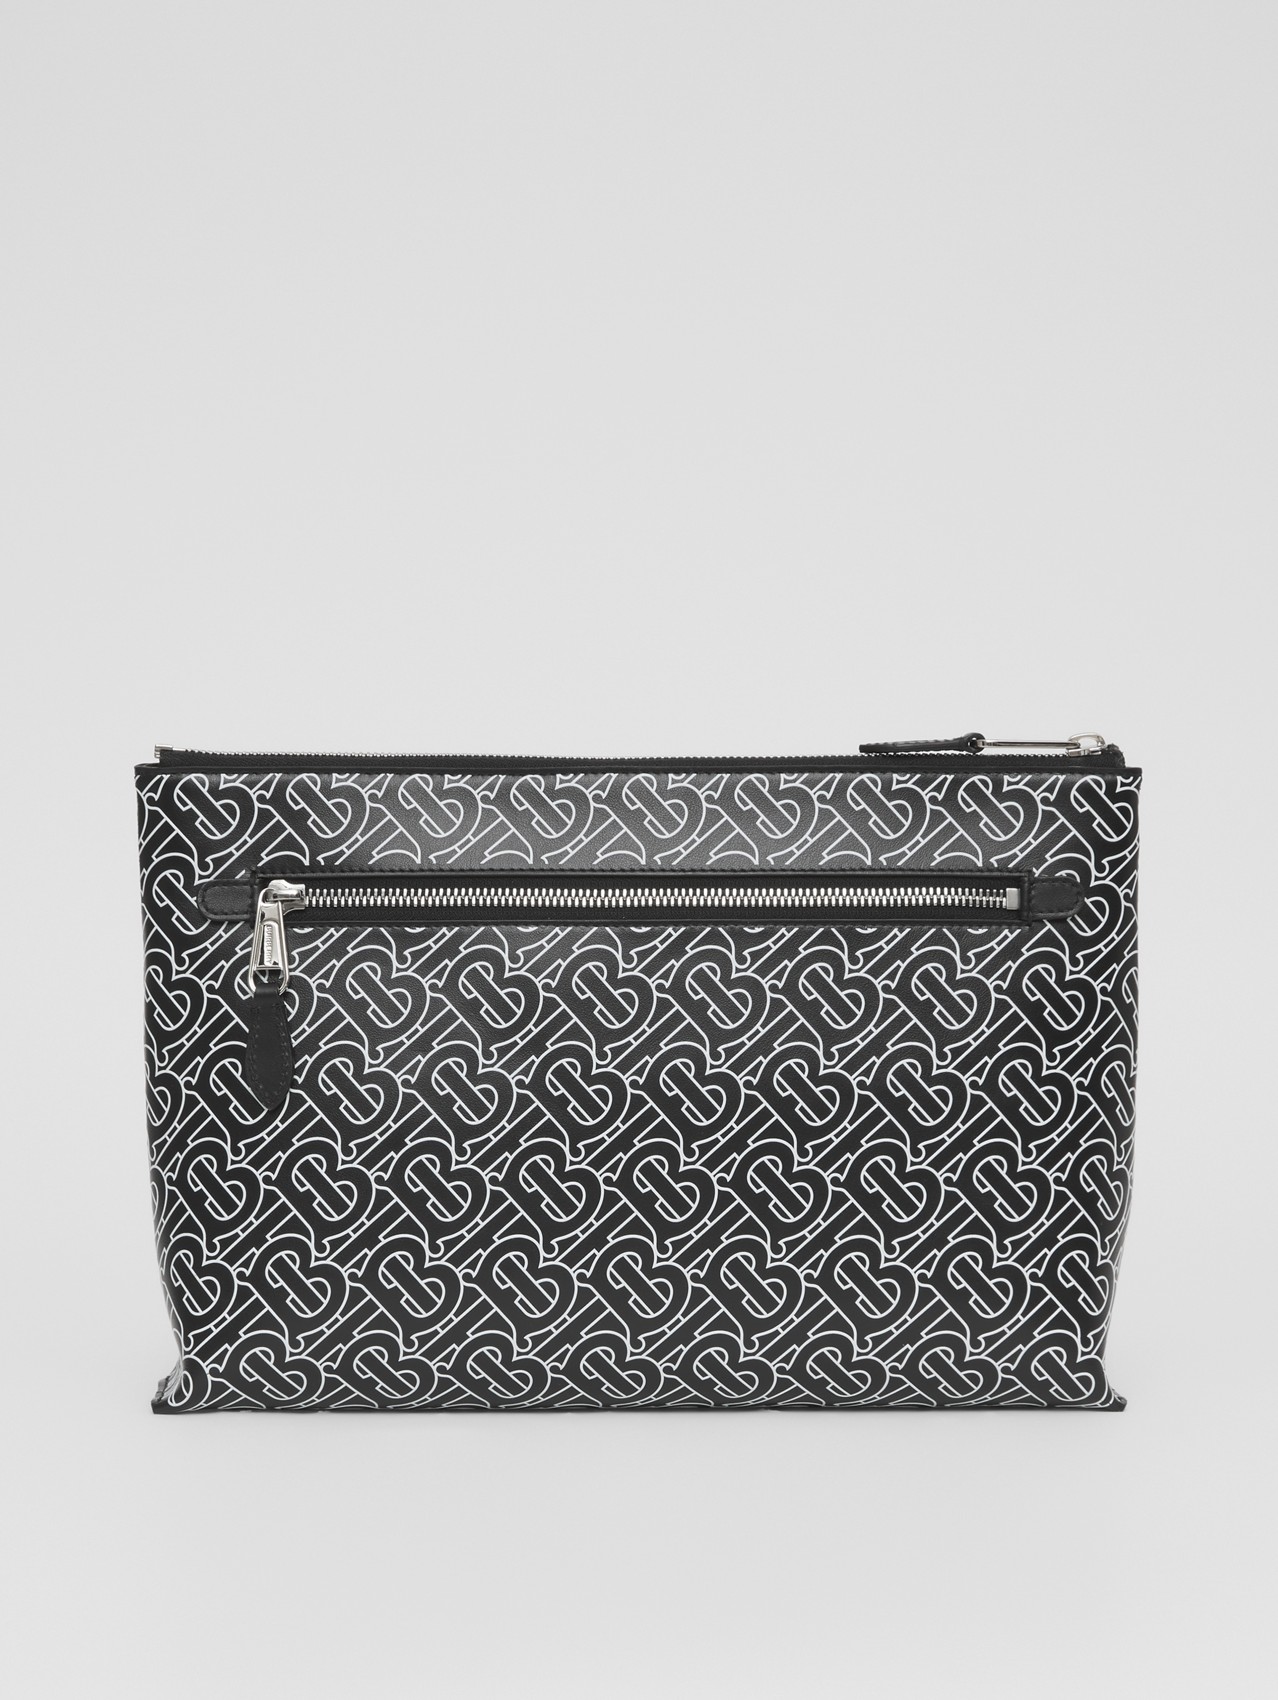 Monogram Print Leather Zip Pouch in Black/white